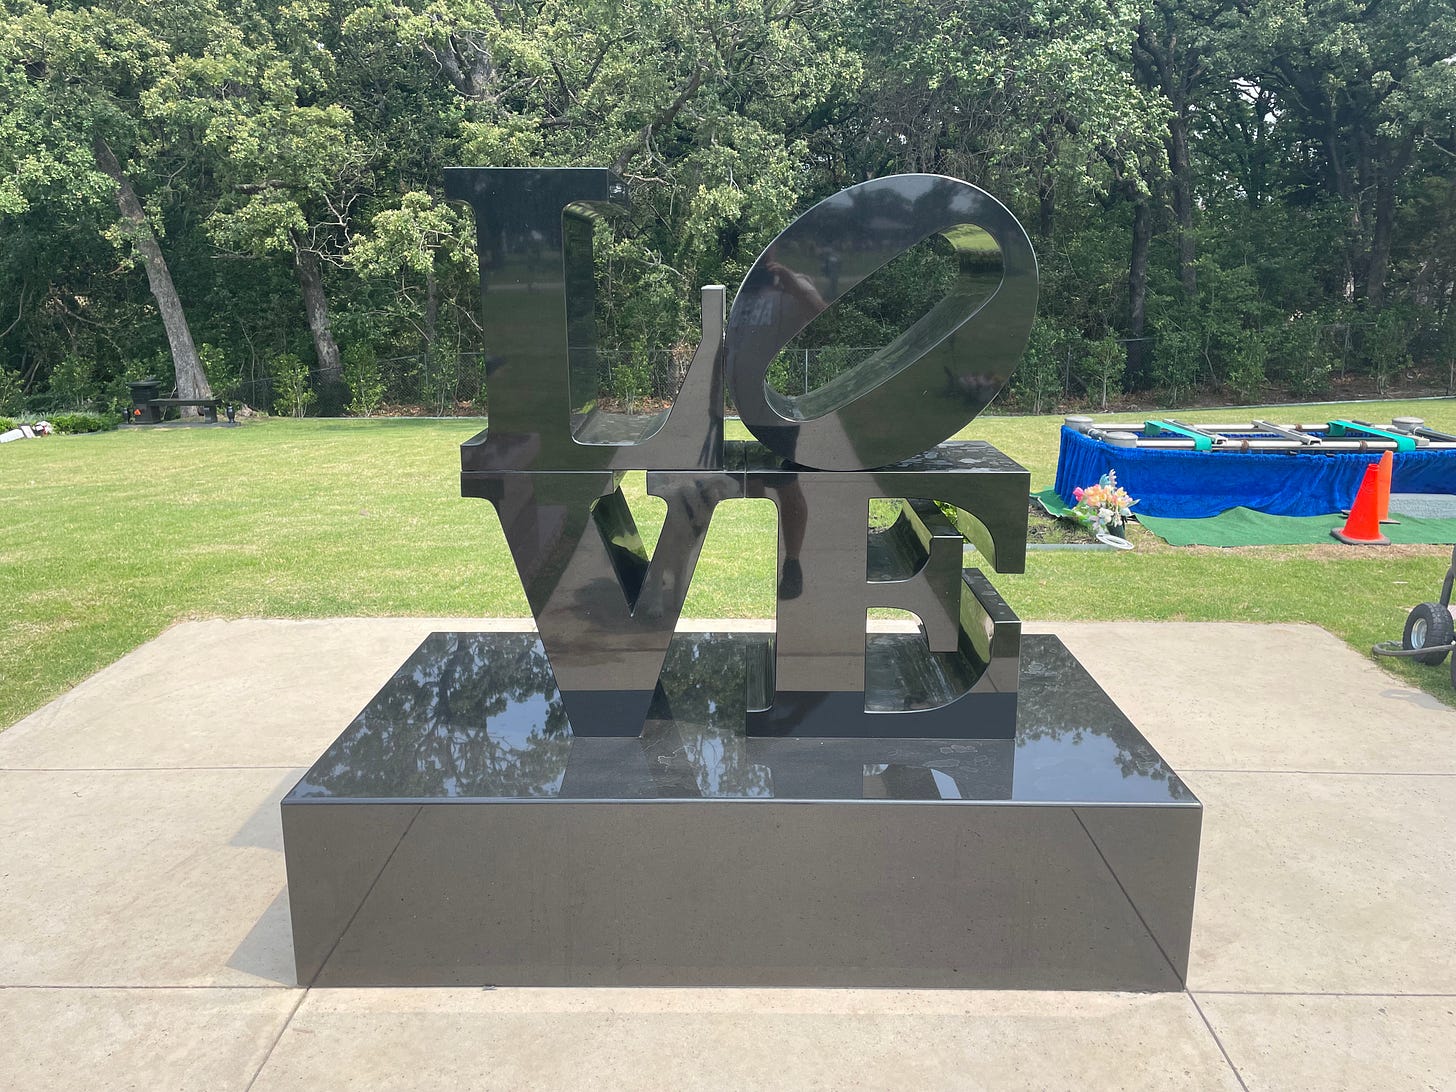 A recreation of Robert Indiana's "LOVE" sculpture in black